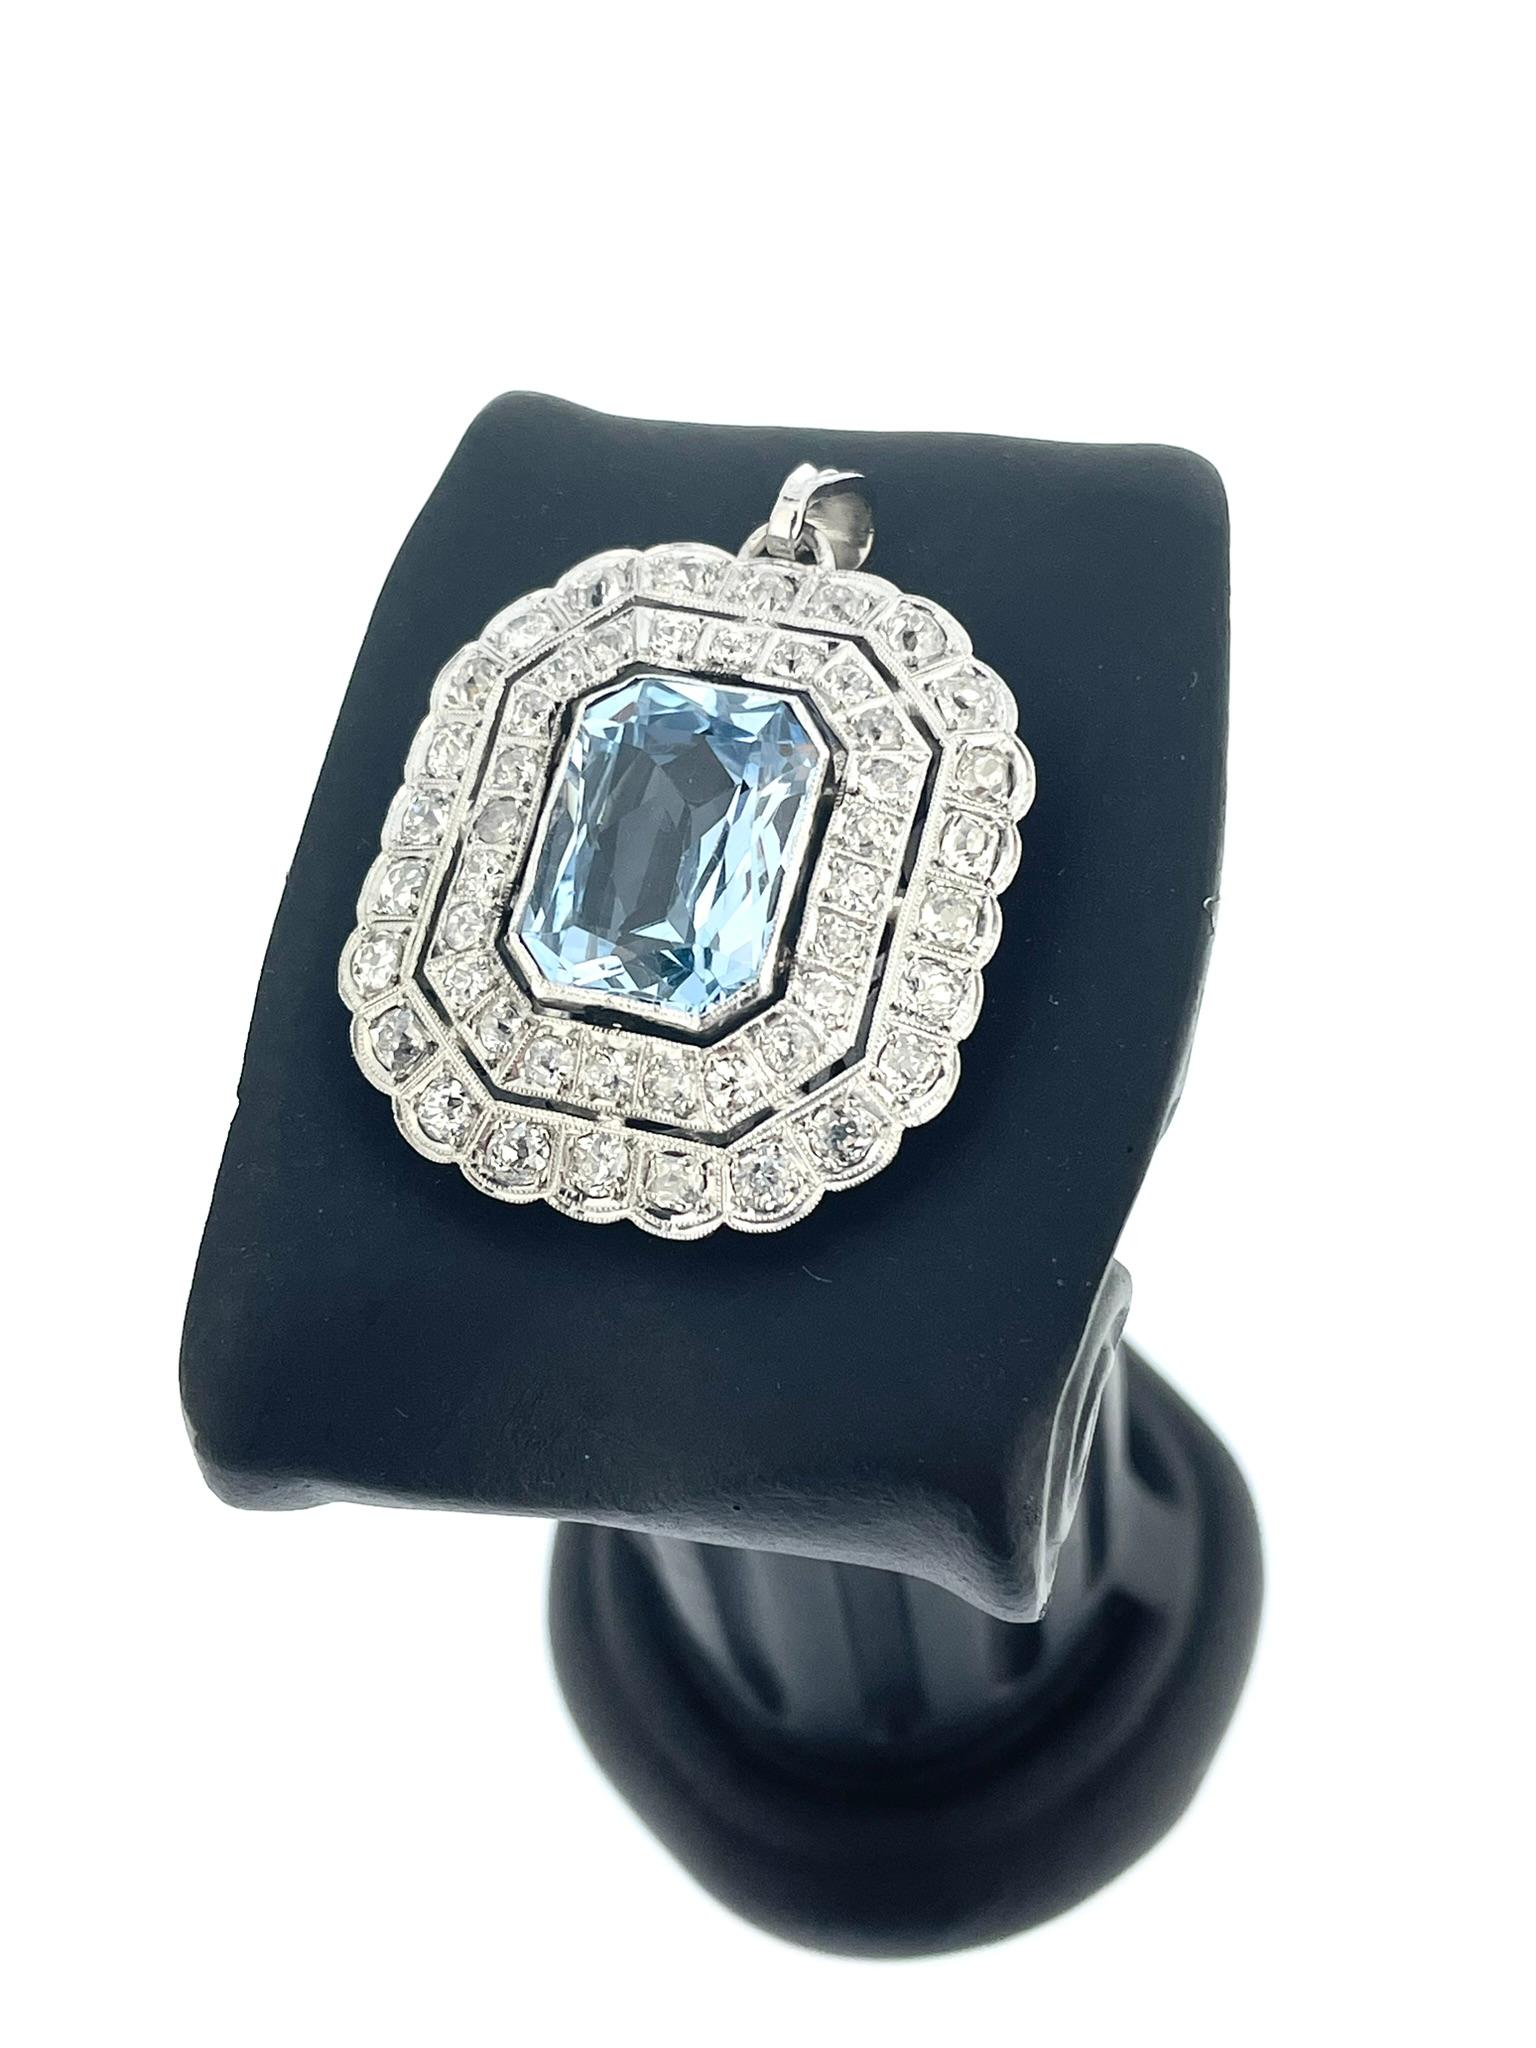 Women's or Men's Art Deco Style White Gold Pendant with Blue Spinel and Diamonds For Sale